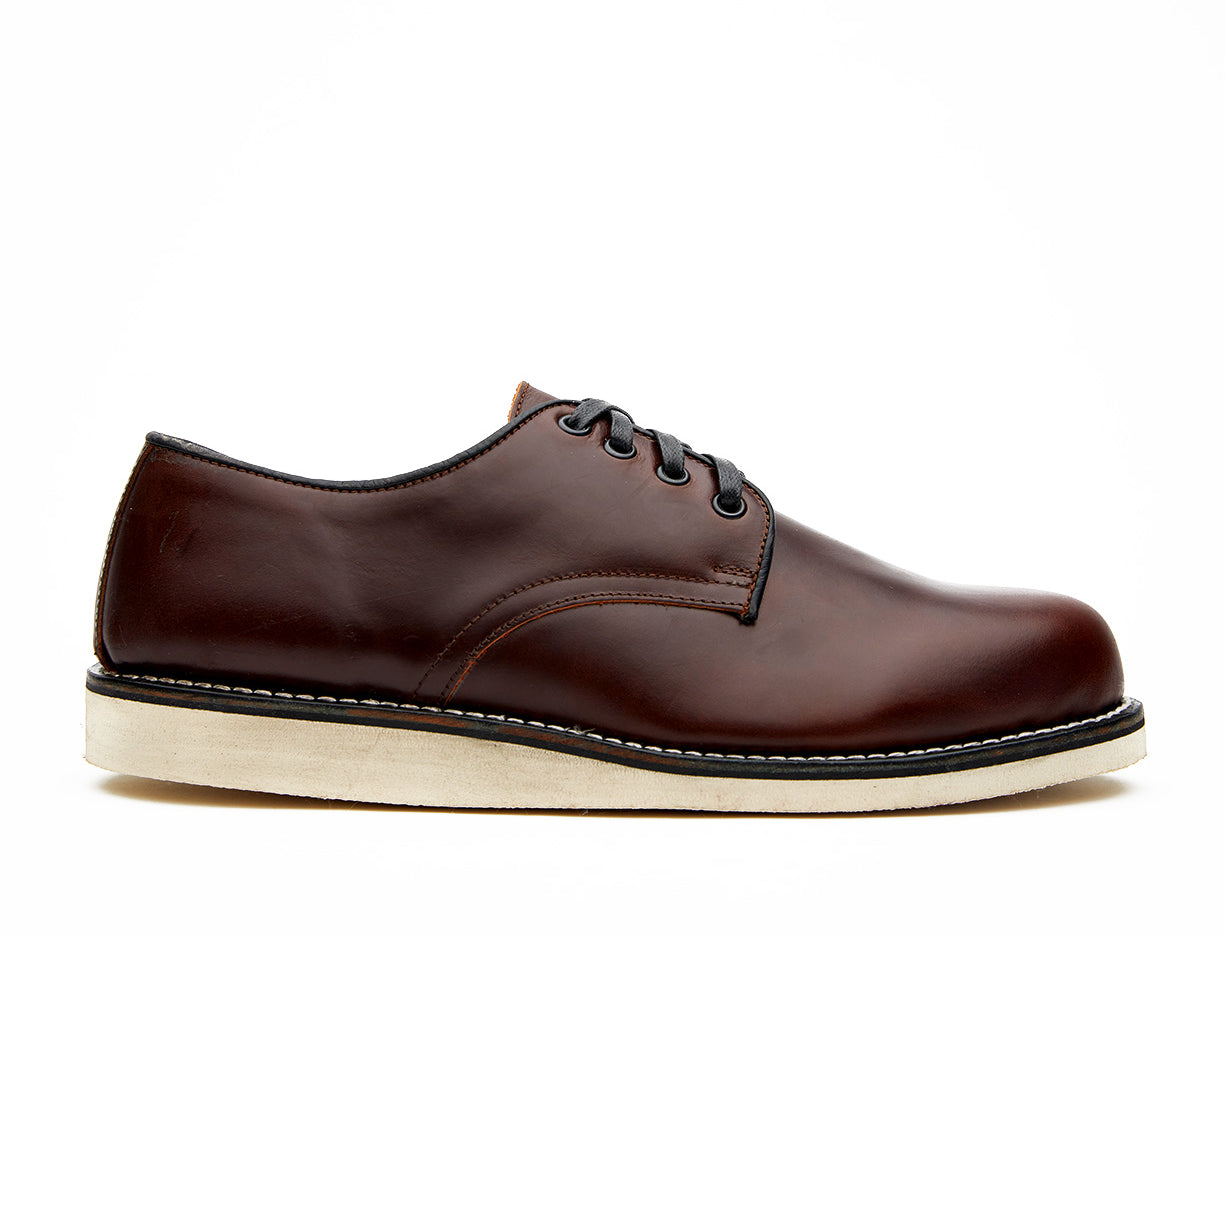 A men's brown Michael II oxford shoe featuring an oxford silhouette on a white background by Broken Homme.